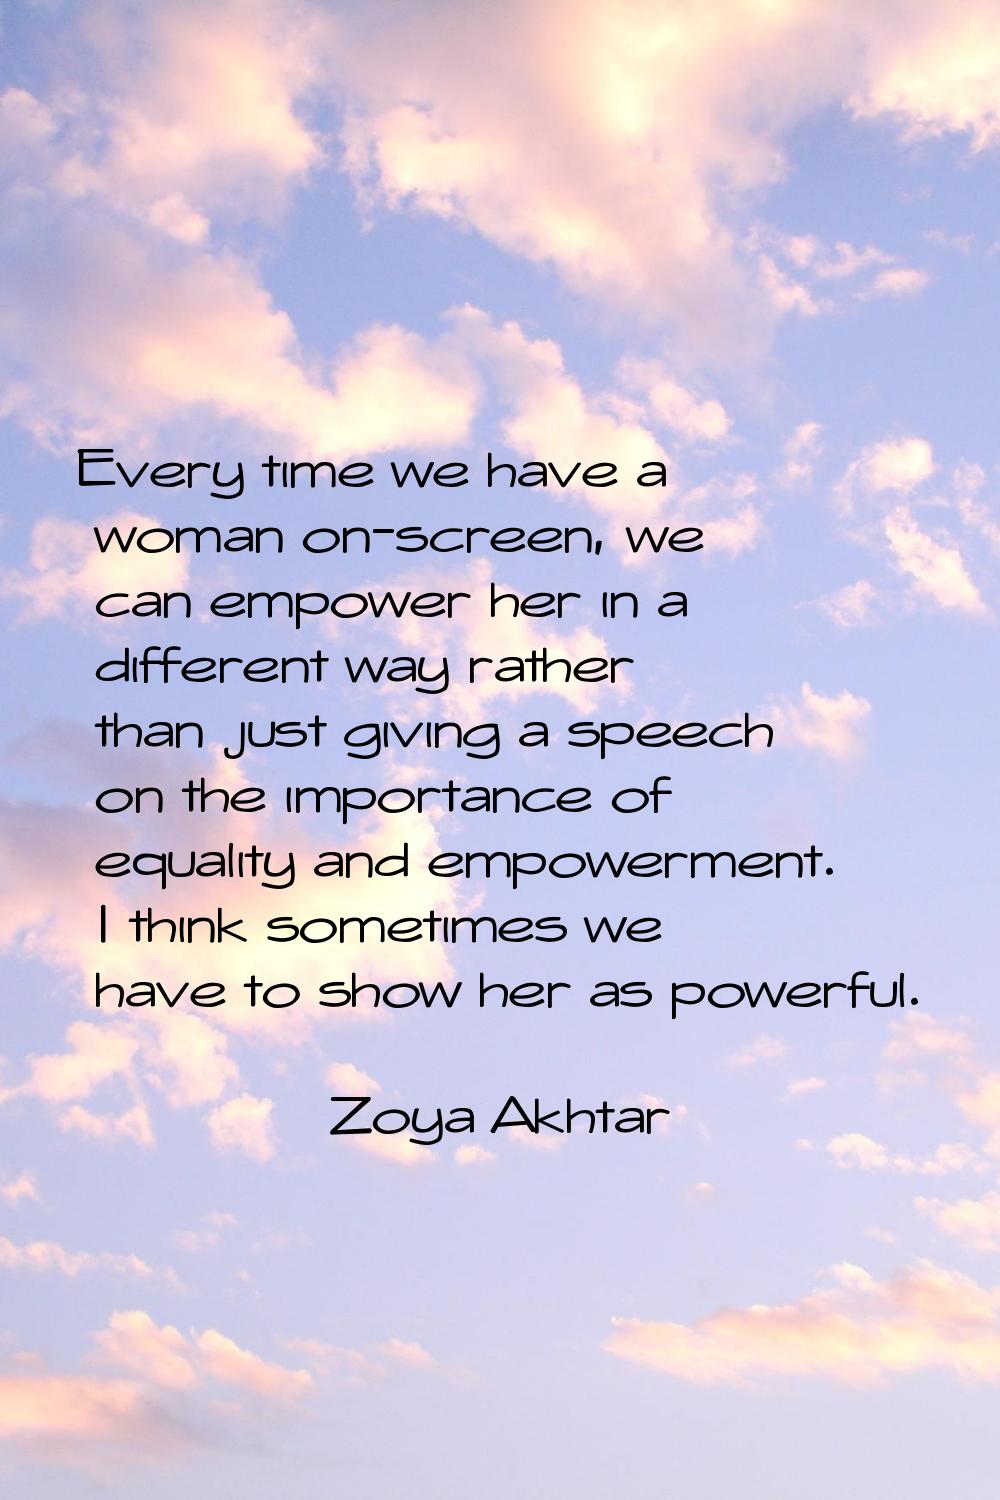 Every time we have a woman on-screen, we can empower her in a different way rather than just giving